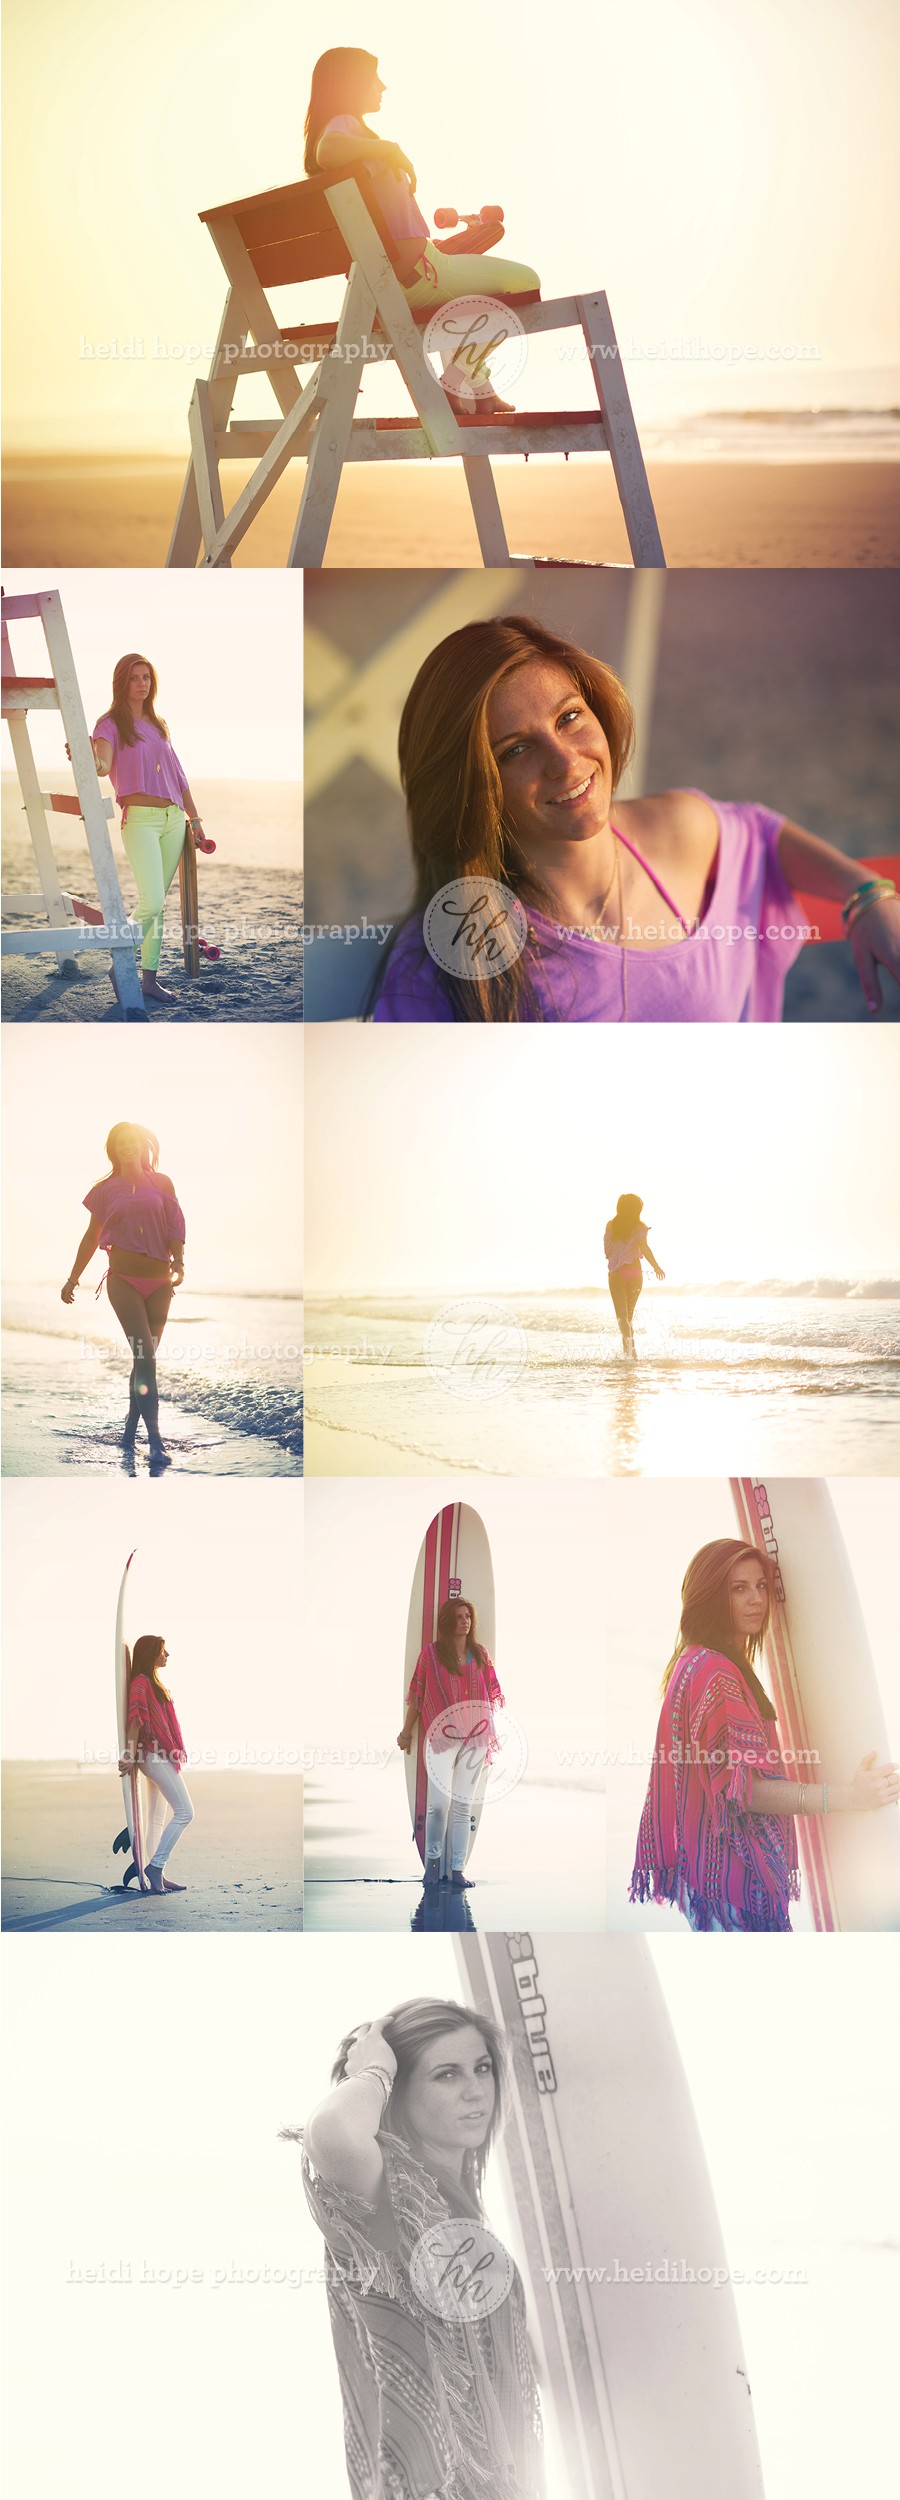 Teen Modeling and Senior Surfing Shoot on the beach by Heidi Hope Photography #surfing #surfer chic #beach style #senior shoot